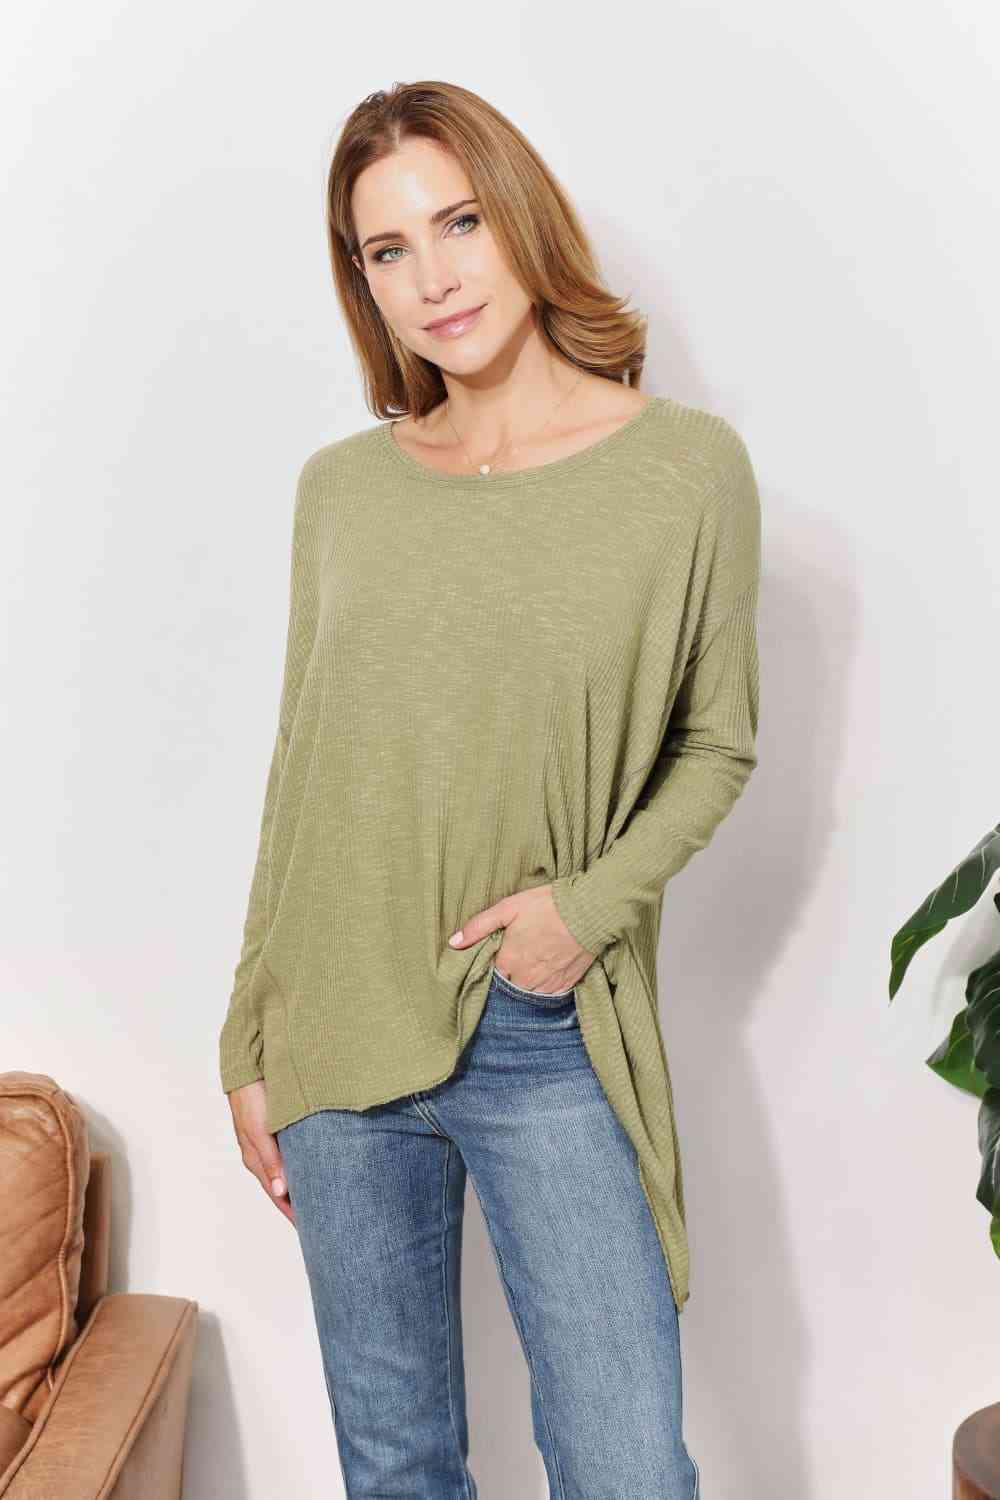 Light Gray HEYSON Full Size Oversized Super Soft Rib Layering Top with a Sharkbite Hem and Round Neck Sentient Beauty Fashions Apparel &amp; Accessories